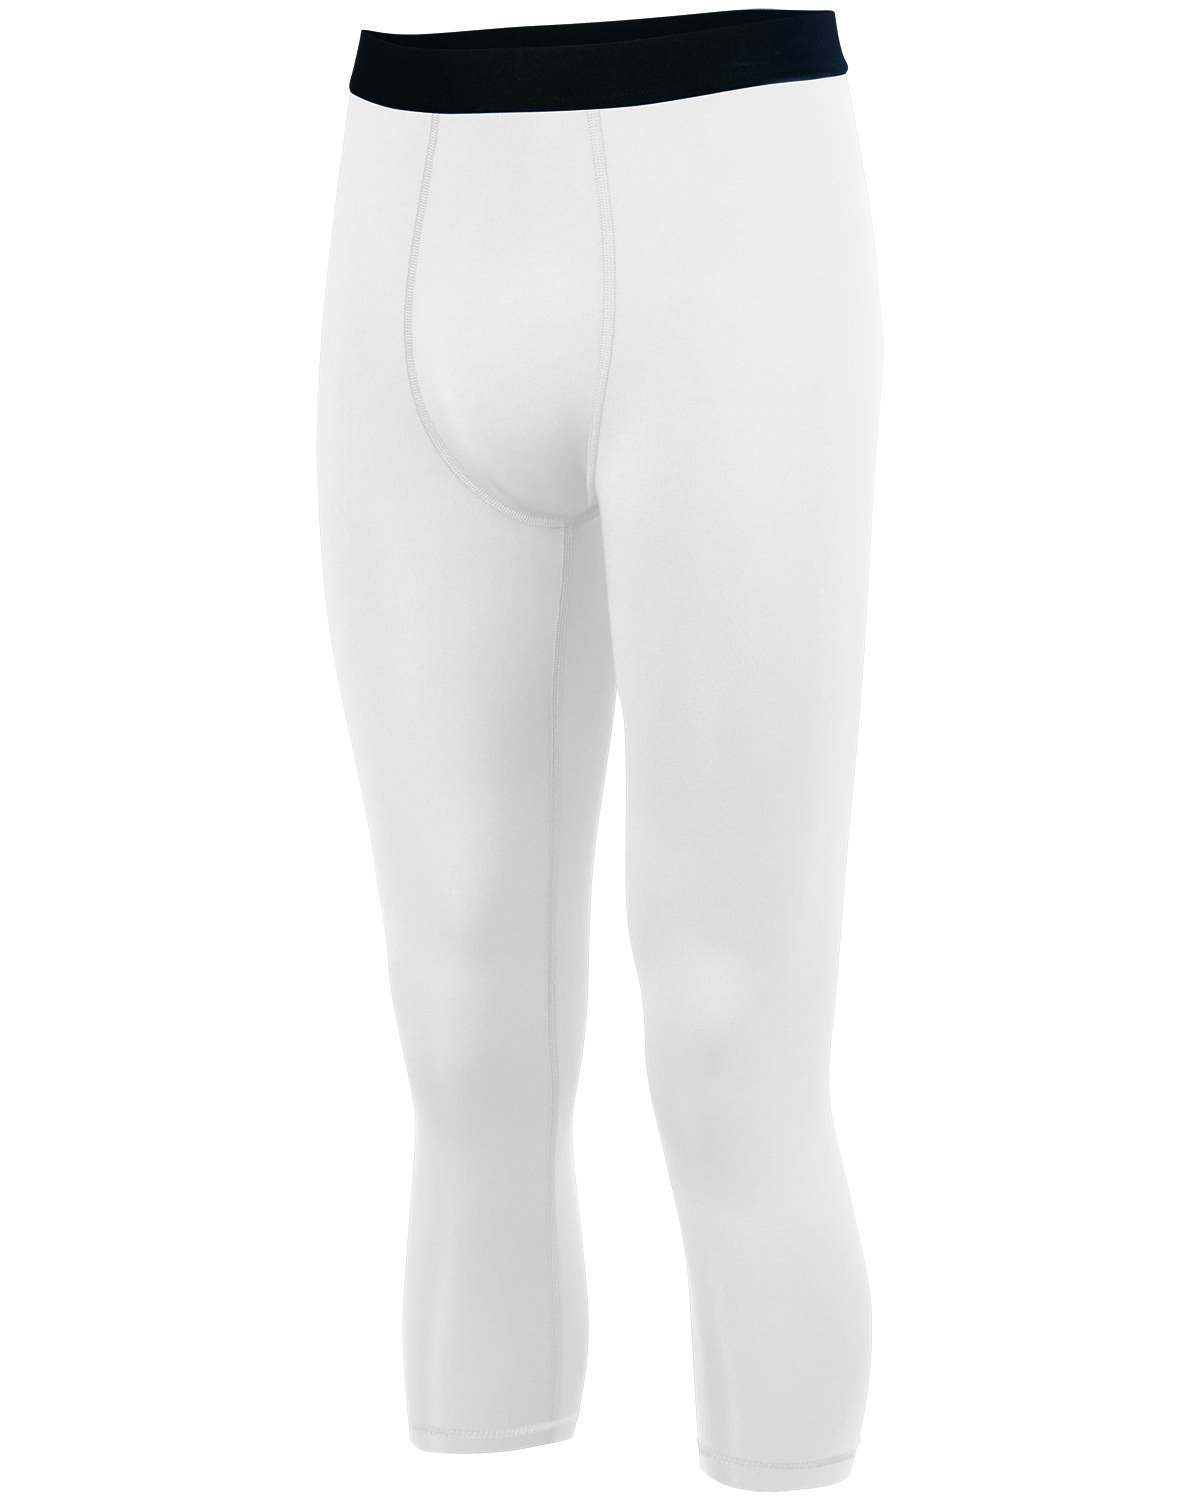 Youth Hyperform Compression Calf Length Tight-